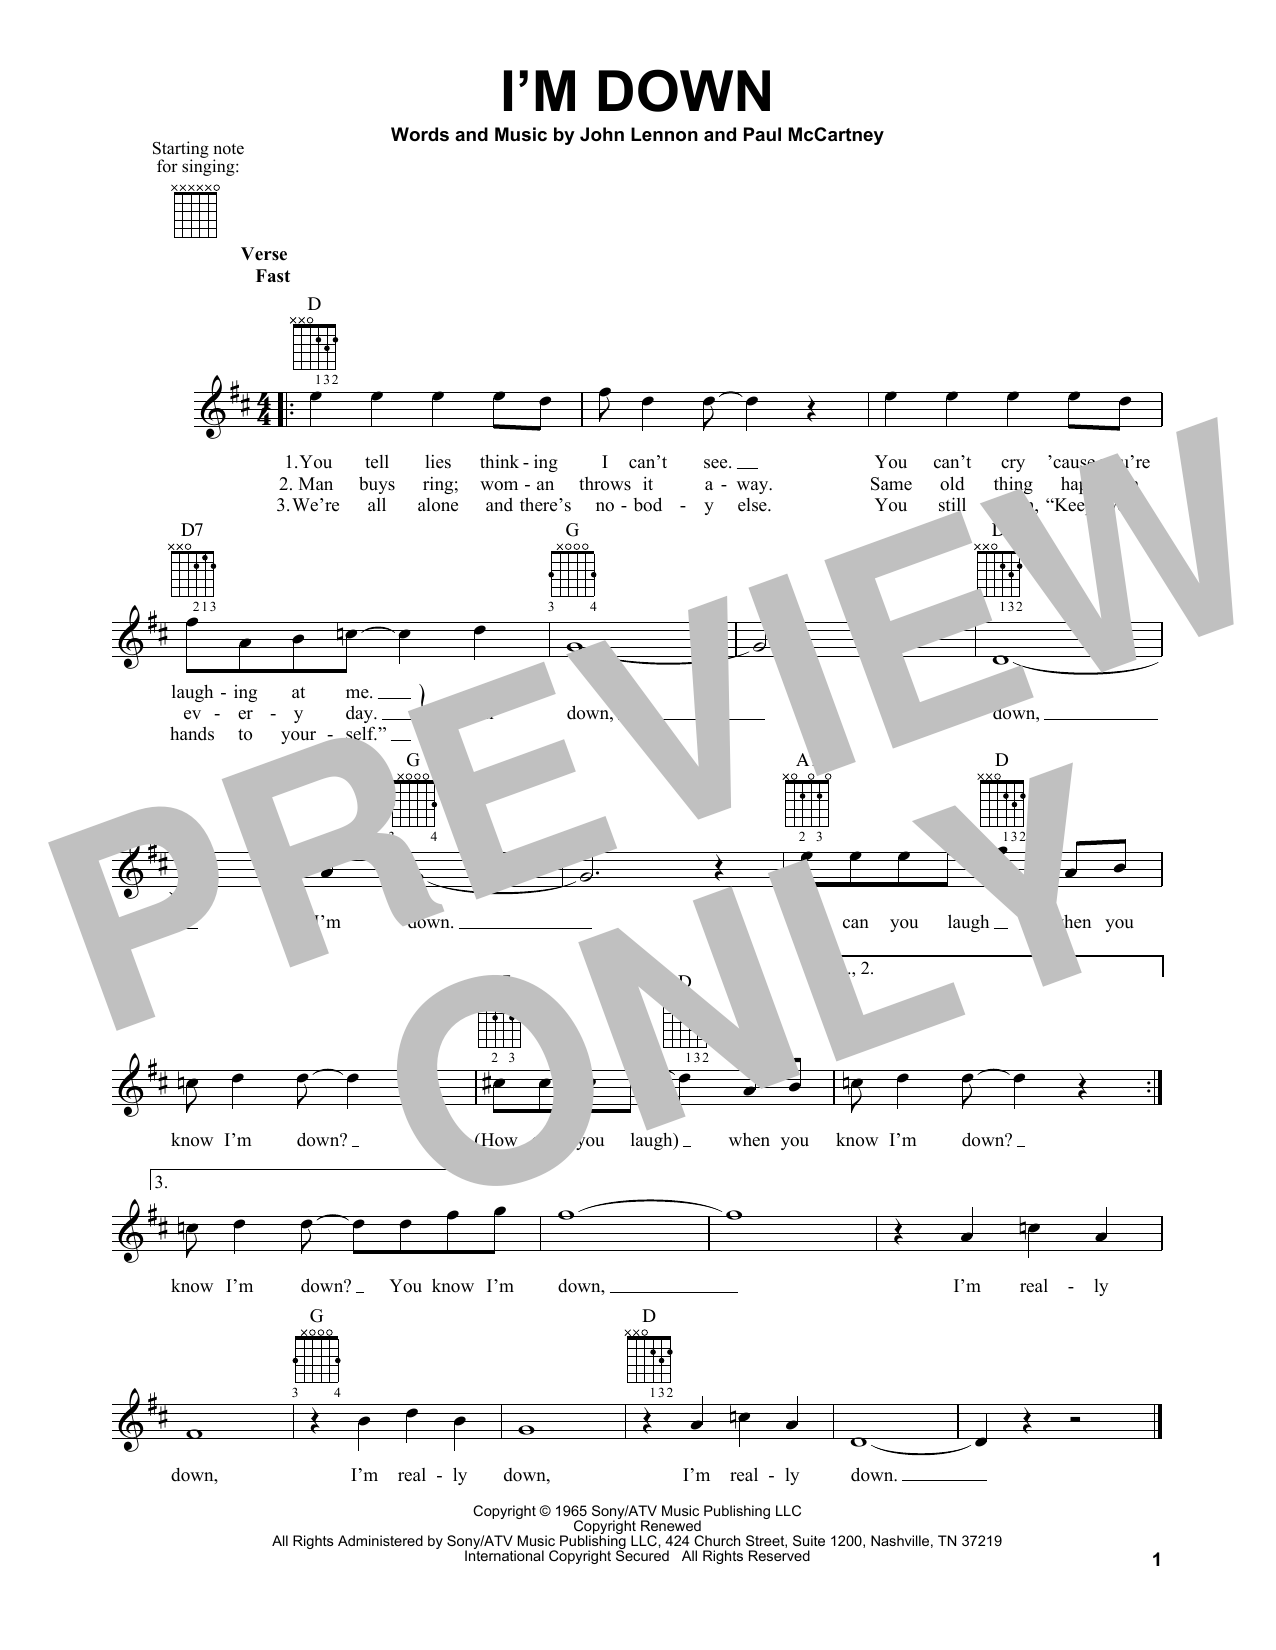 Download The Beatles I'm Down Sheet Music